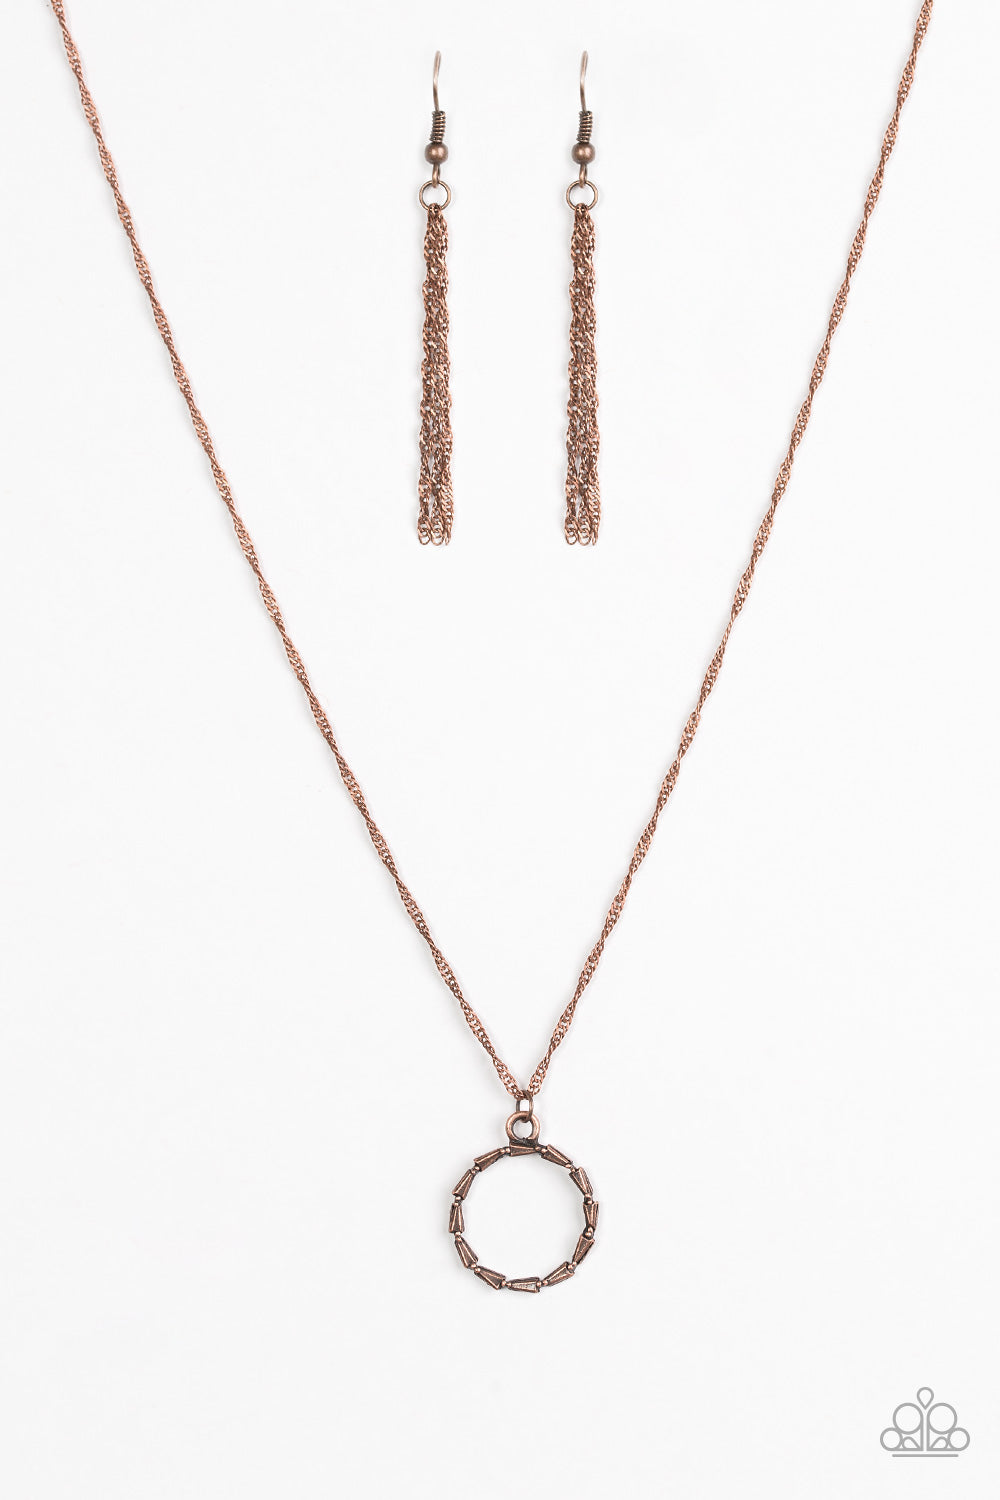 Paparazzi Necklace - Simply Simple - Copper